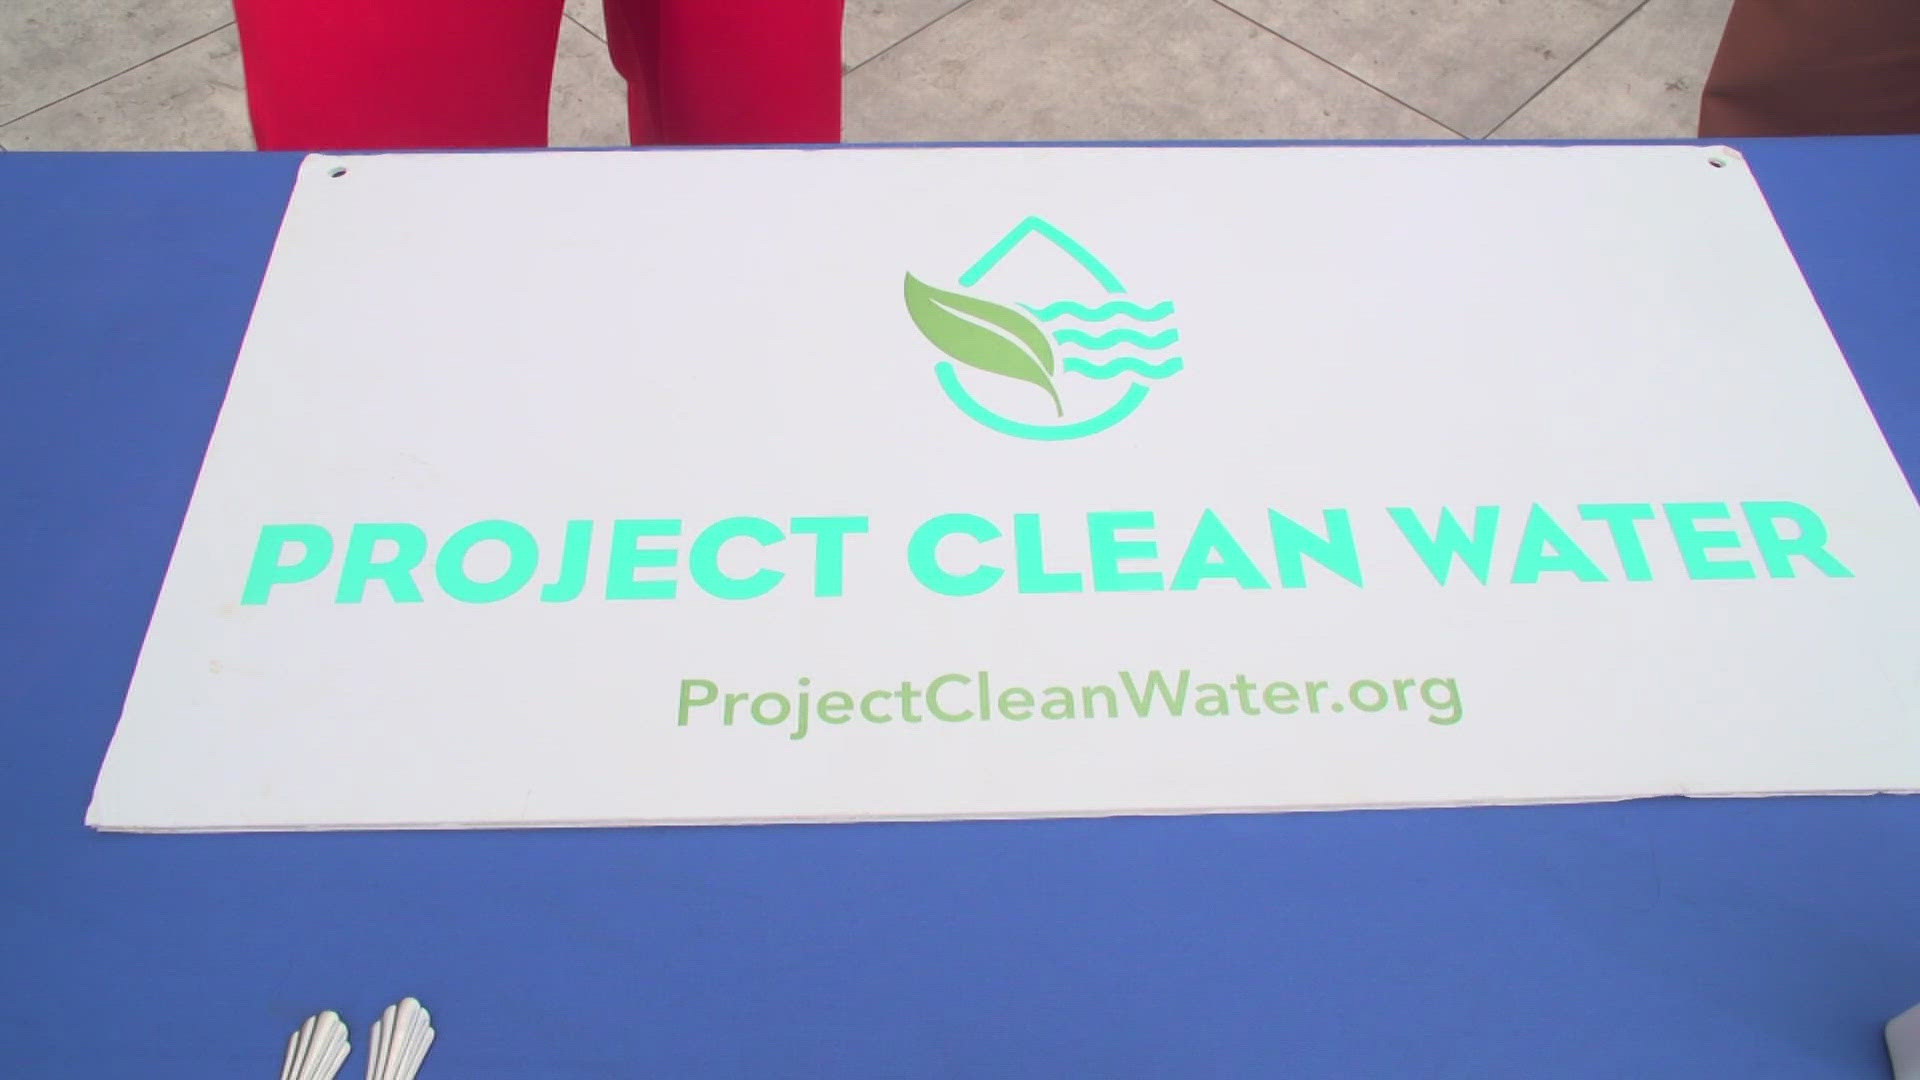 Project Clean Water on just why July 5th is considered the dirtiest beach day.